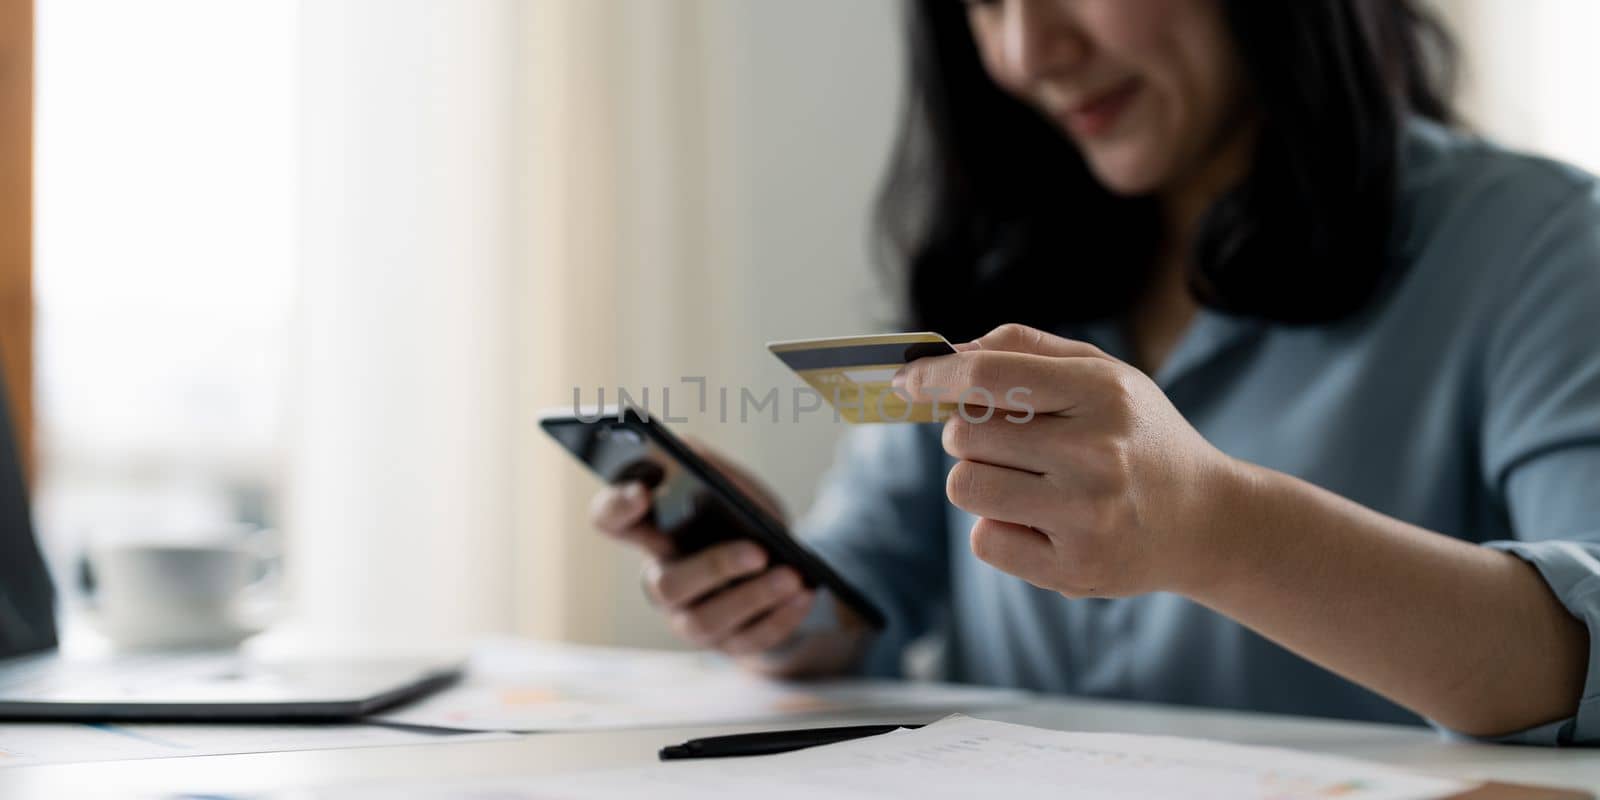 woman hand holding credit card with using smartphone for online shopping while making orders at home. business, lifestyle, technology, ecommerce, digital banking and online payment concept.